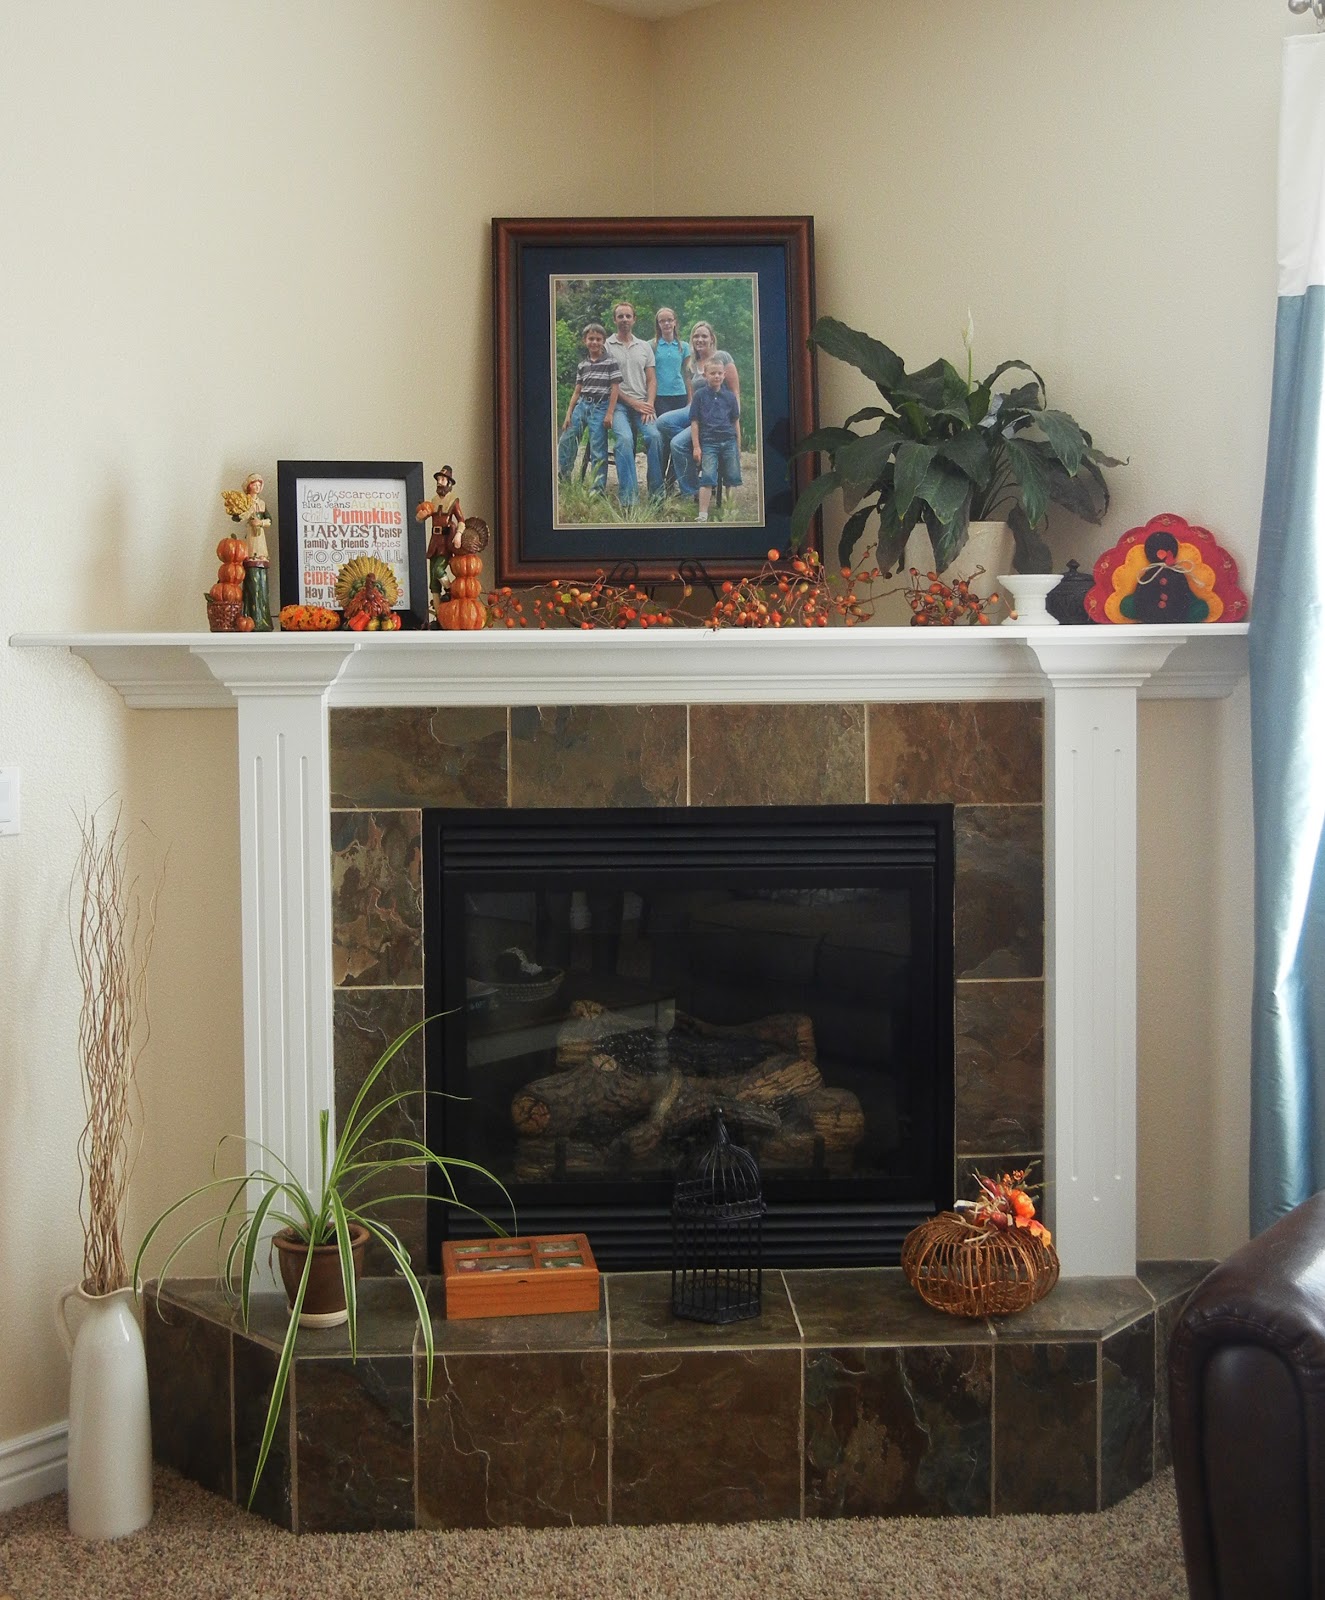 Vanessa's Fireplace, With Its Tile Base And Deep Corner Top Ledge, Is